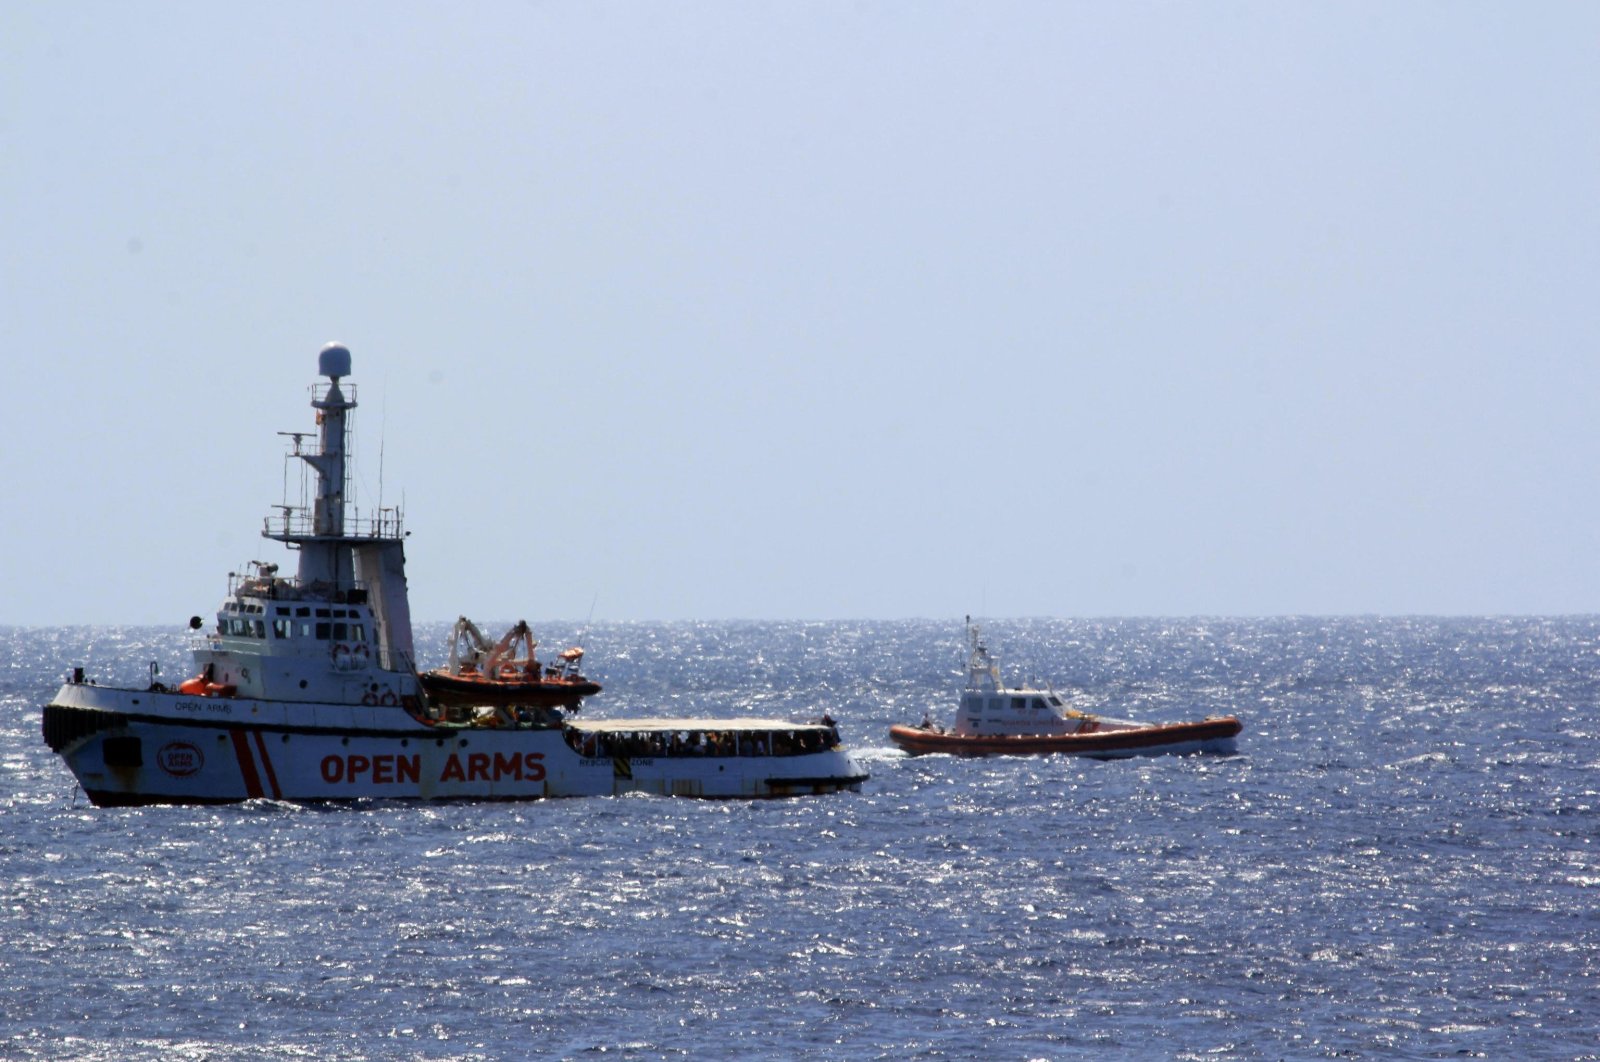 The Open Arms Spanish humanitarian boat with 147 migrants (L) is monitored by an Italian coast guard vessel as it sails off the coast of the Sicilian island of Lampedusa, southern Italy, Aug. 15, 2019. (AP Photo)